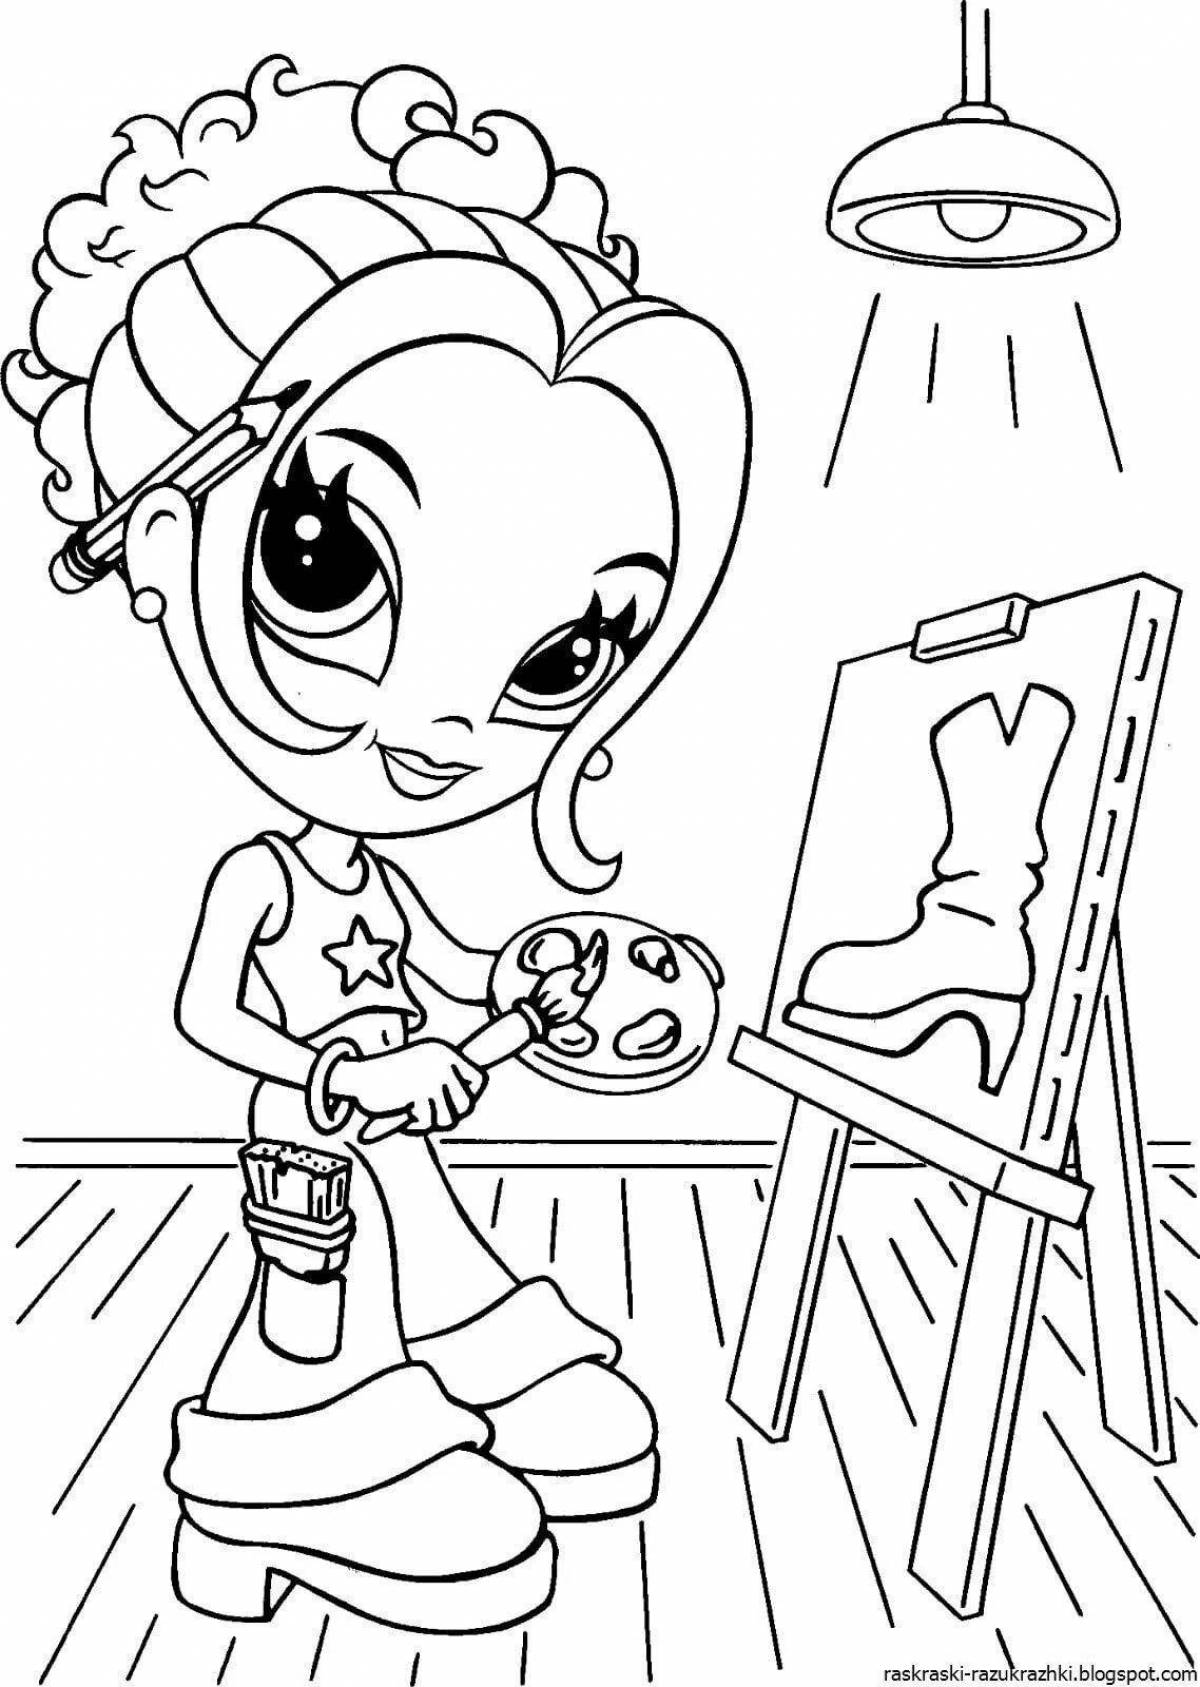 Radiant coloring book for girls 5-6 years old